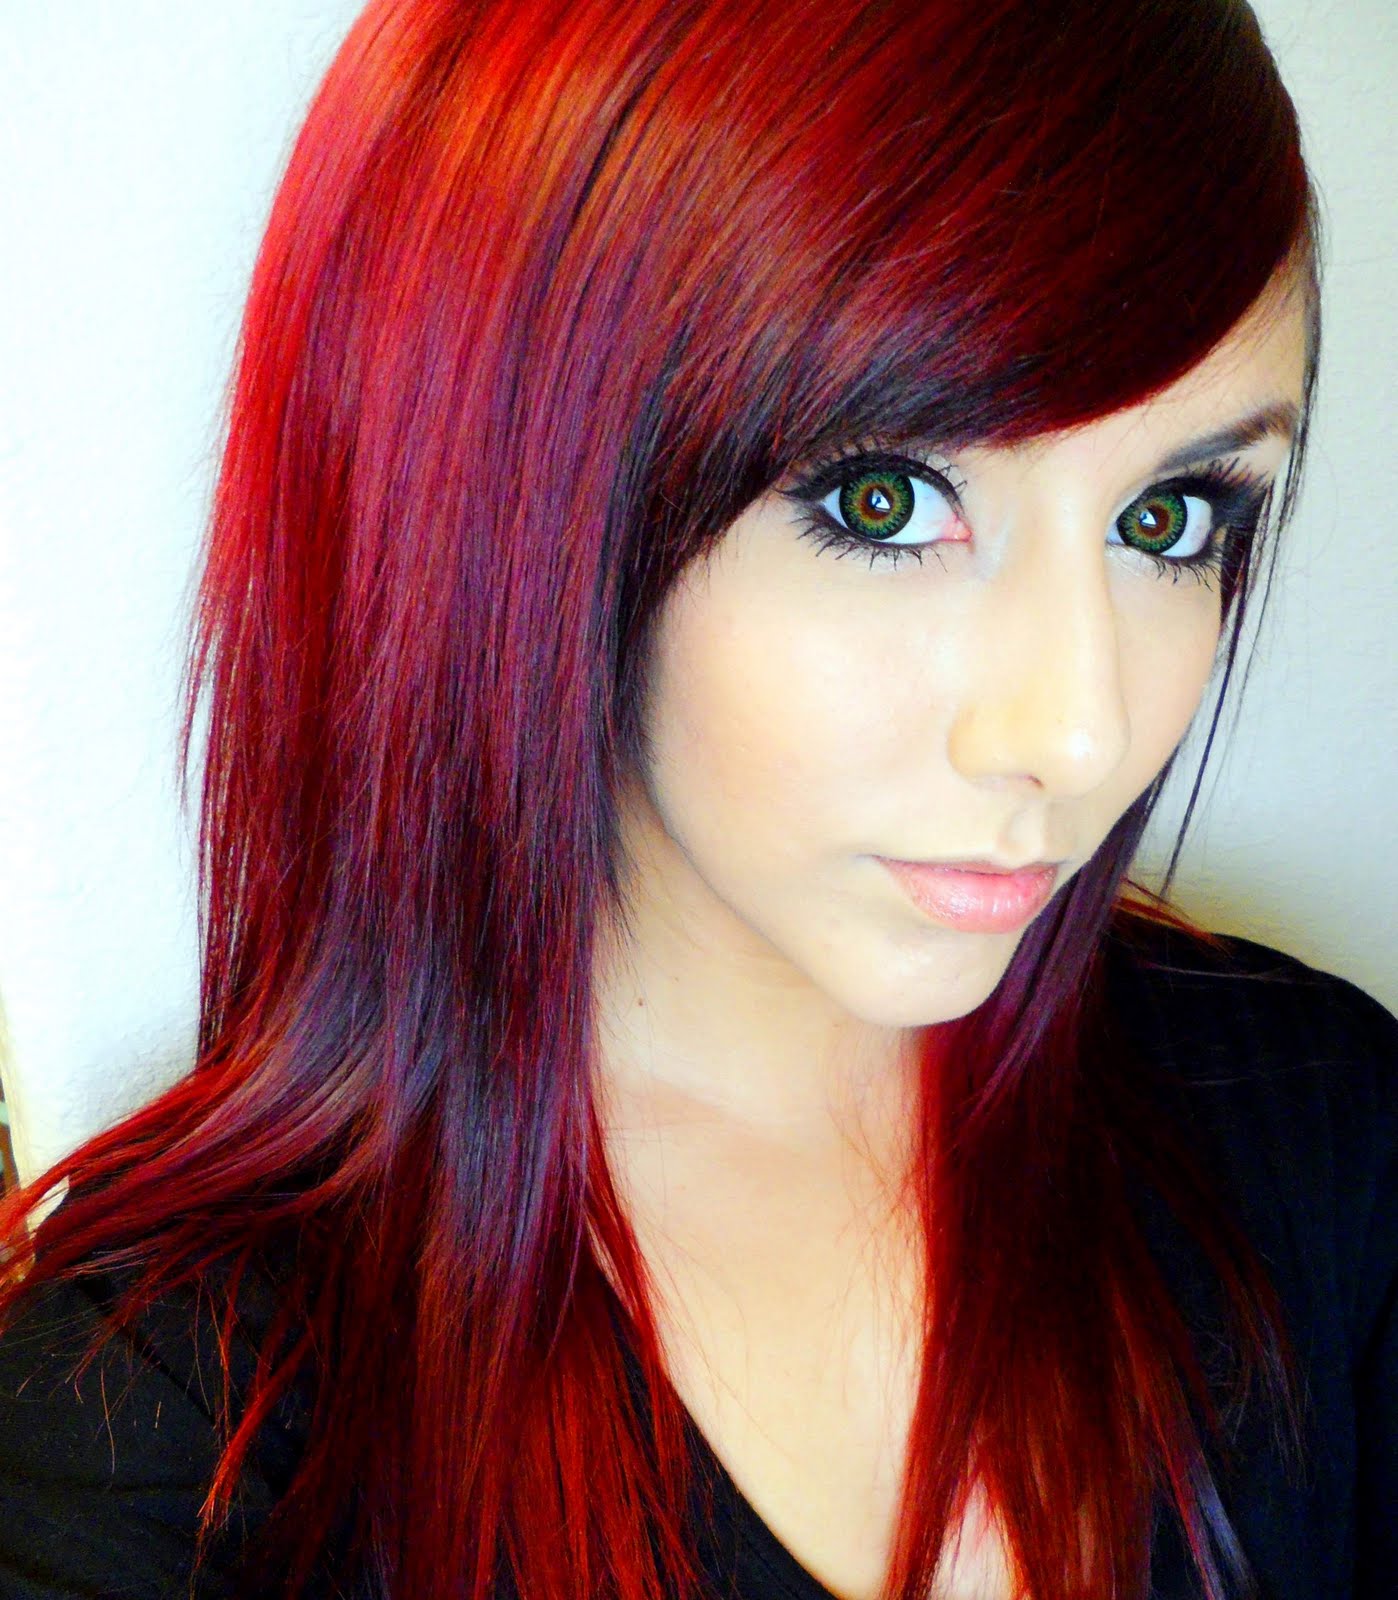 Technicolor: My Hair Color  How To Get Dark Red Hair!!